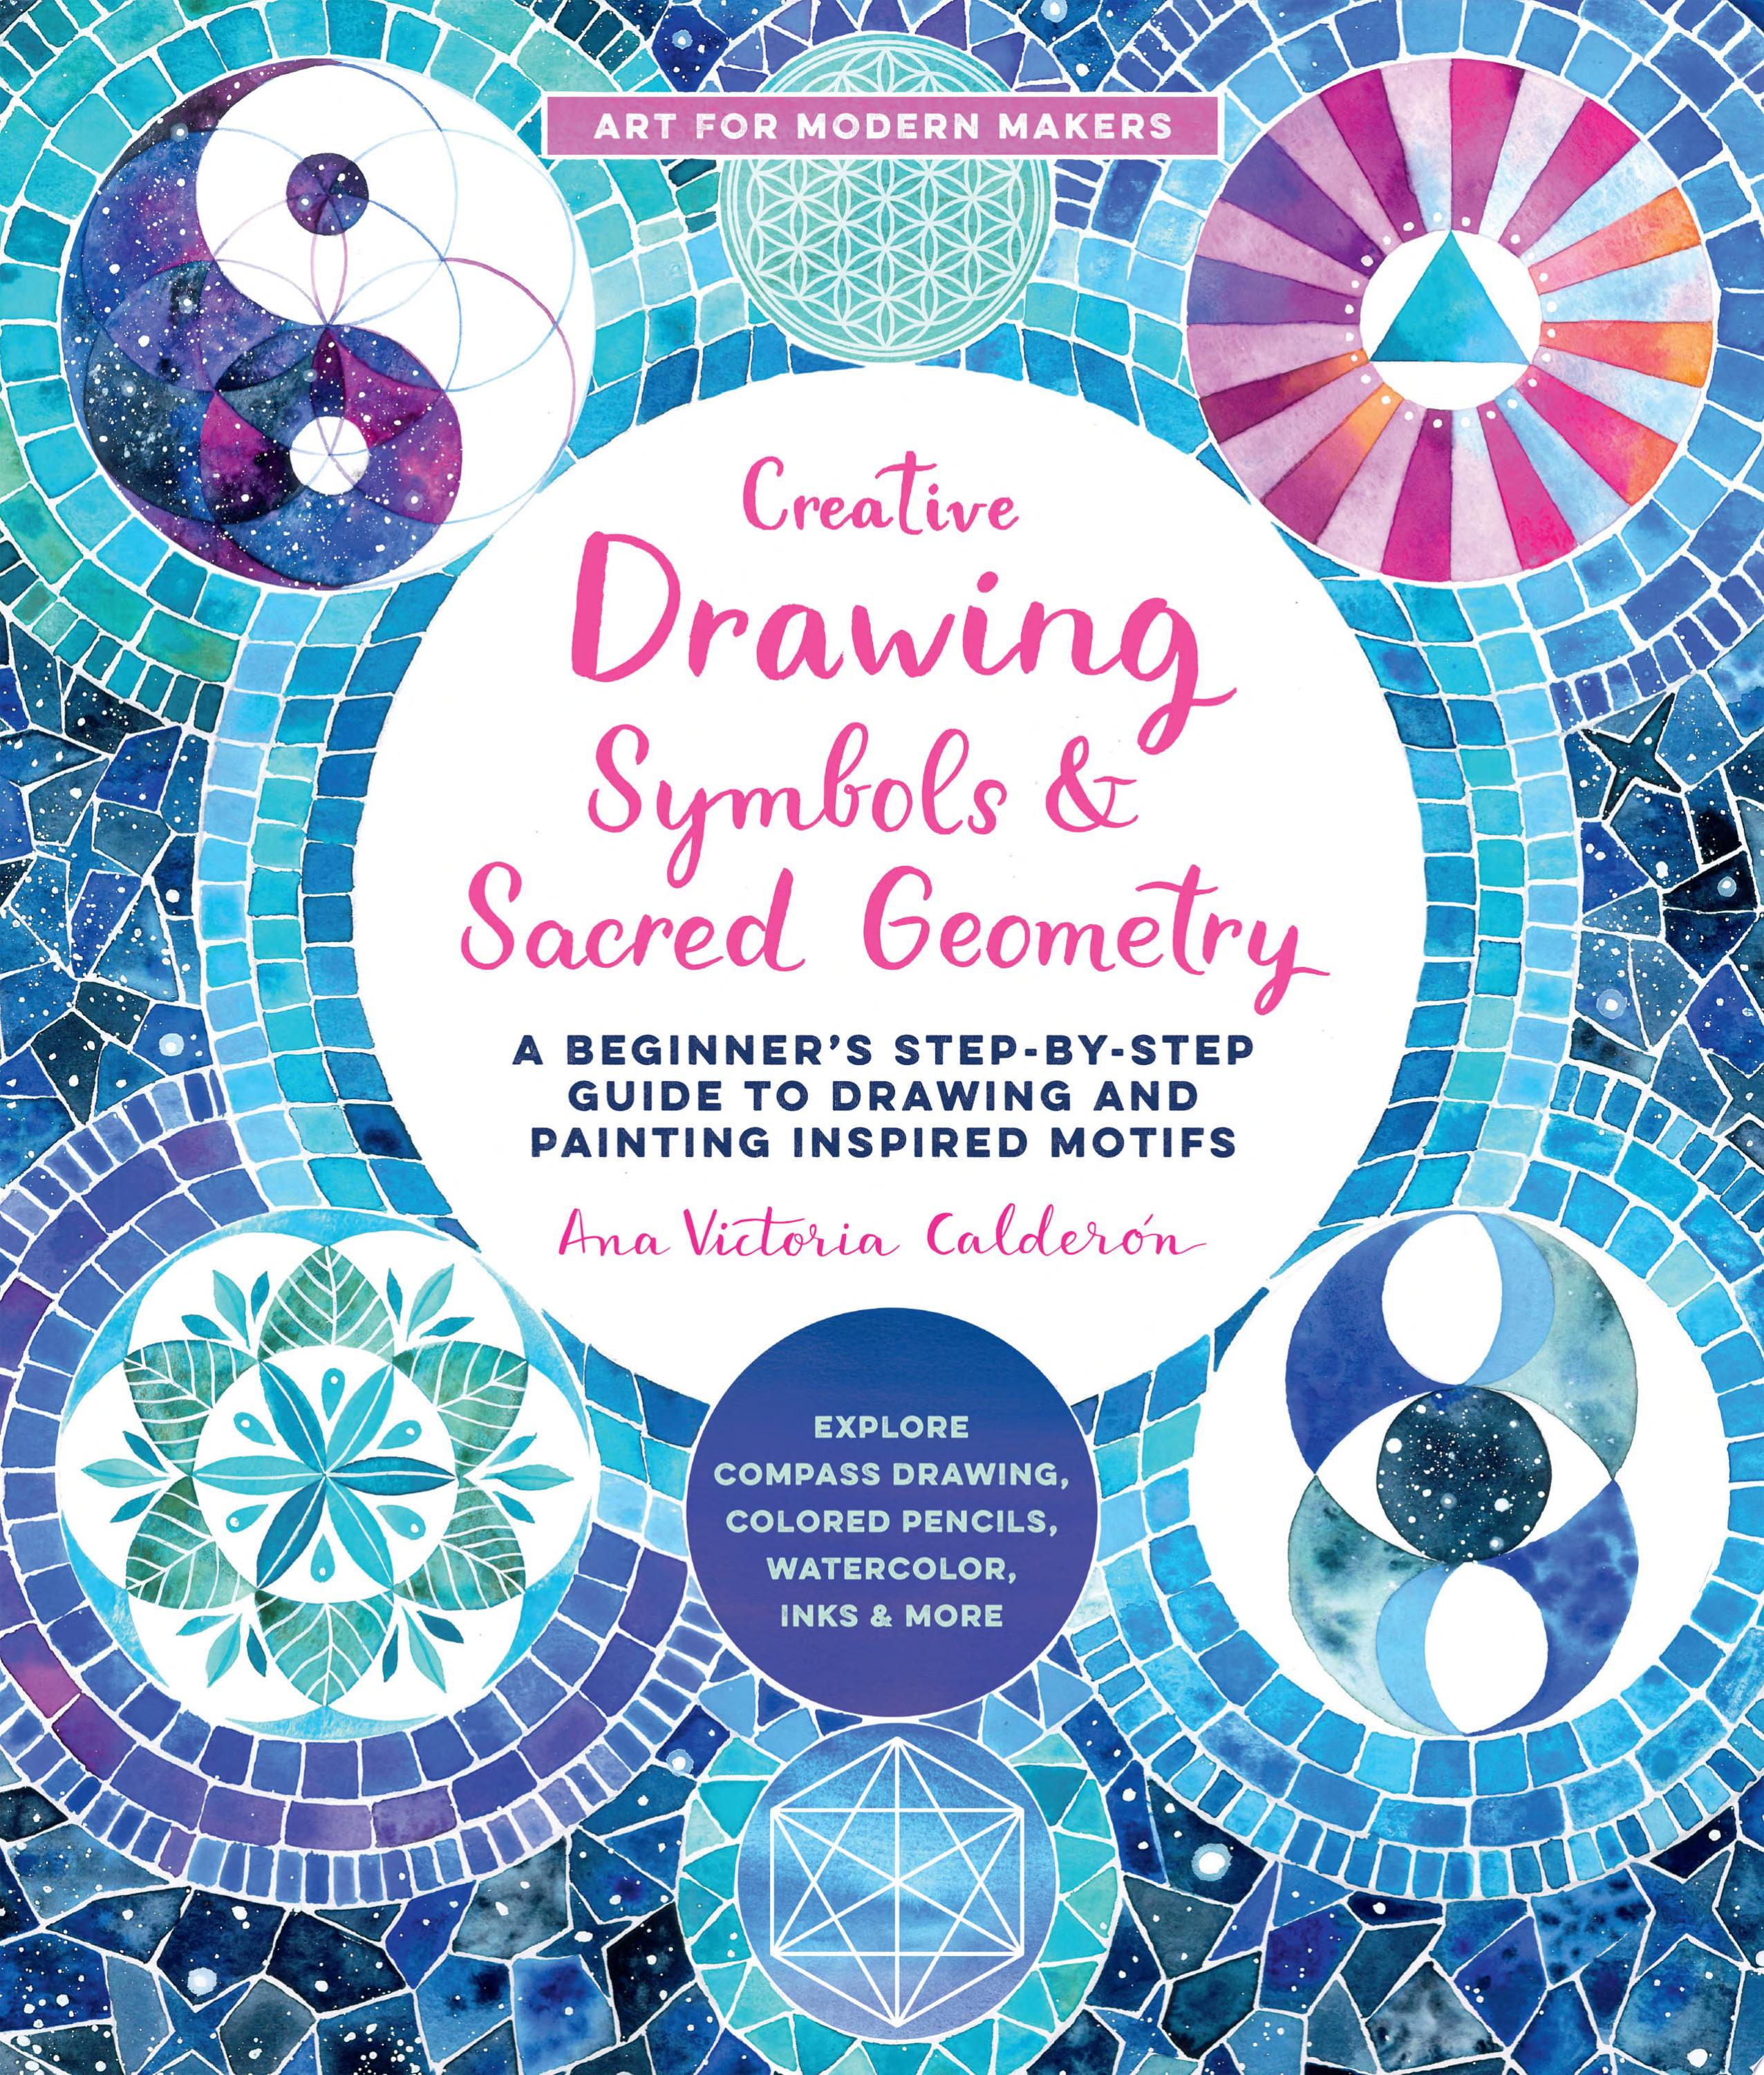 Image for "Creative Drawing: Symbols and Sacred Geometry"